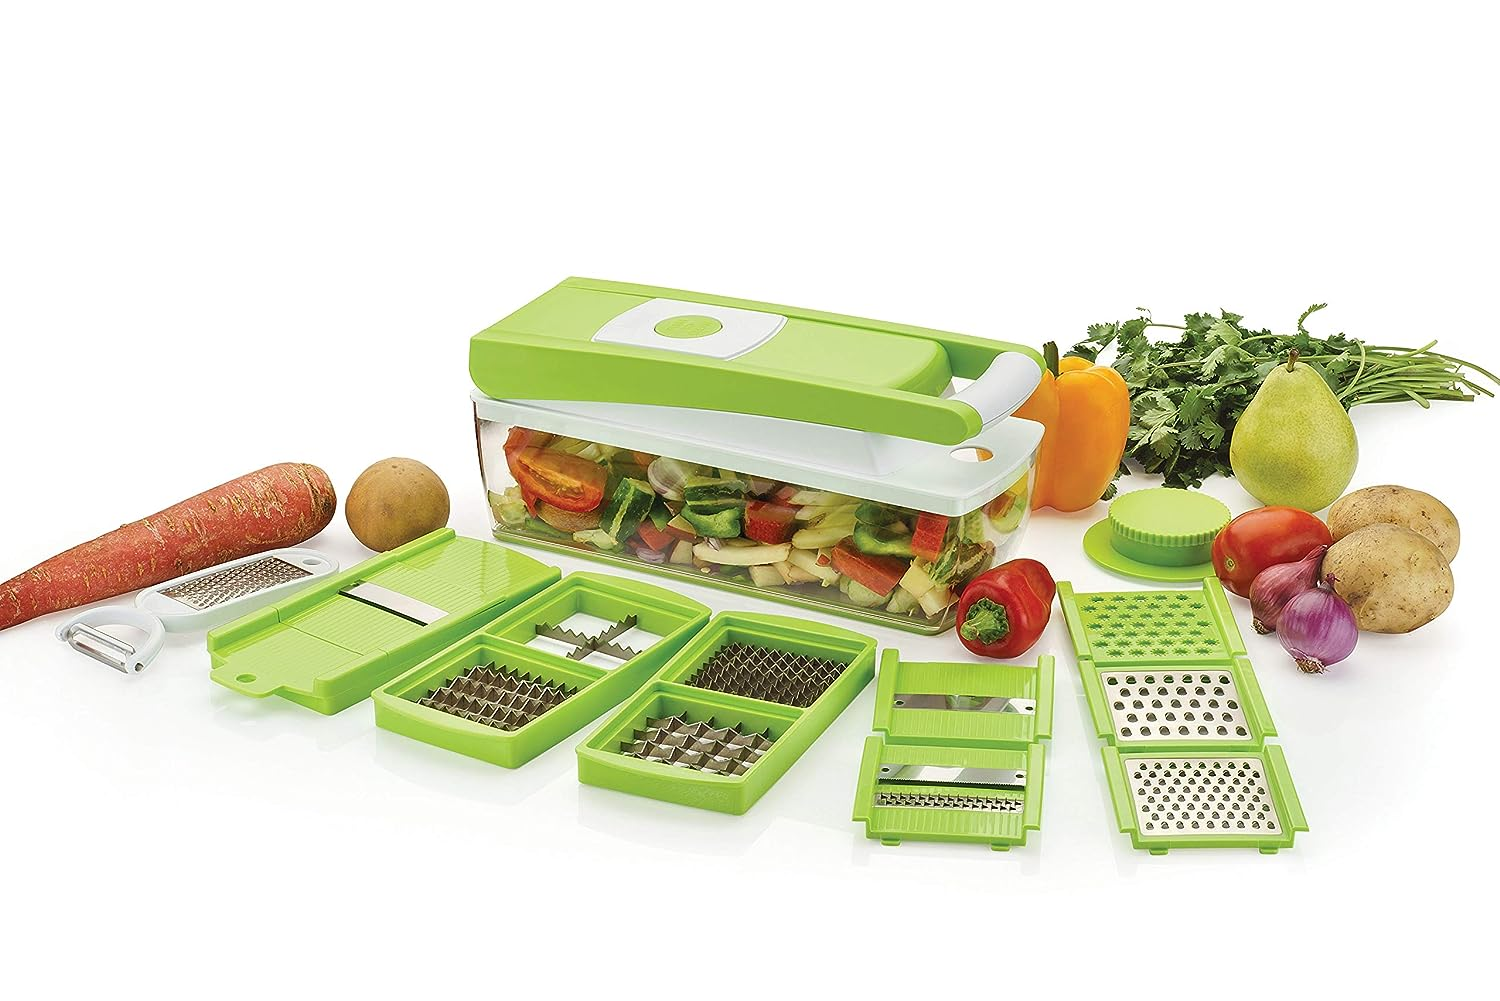 Multifunctional Vegetable Cutter Efficient All-in-one Vegetable